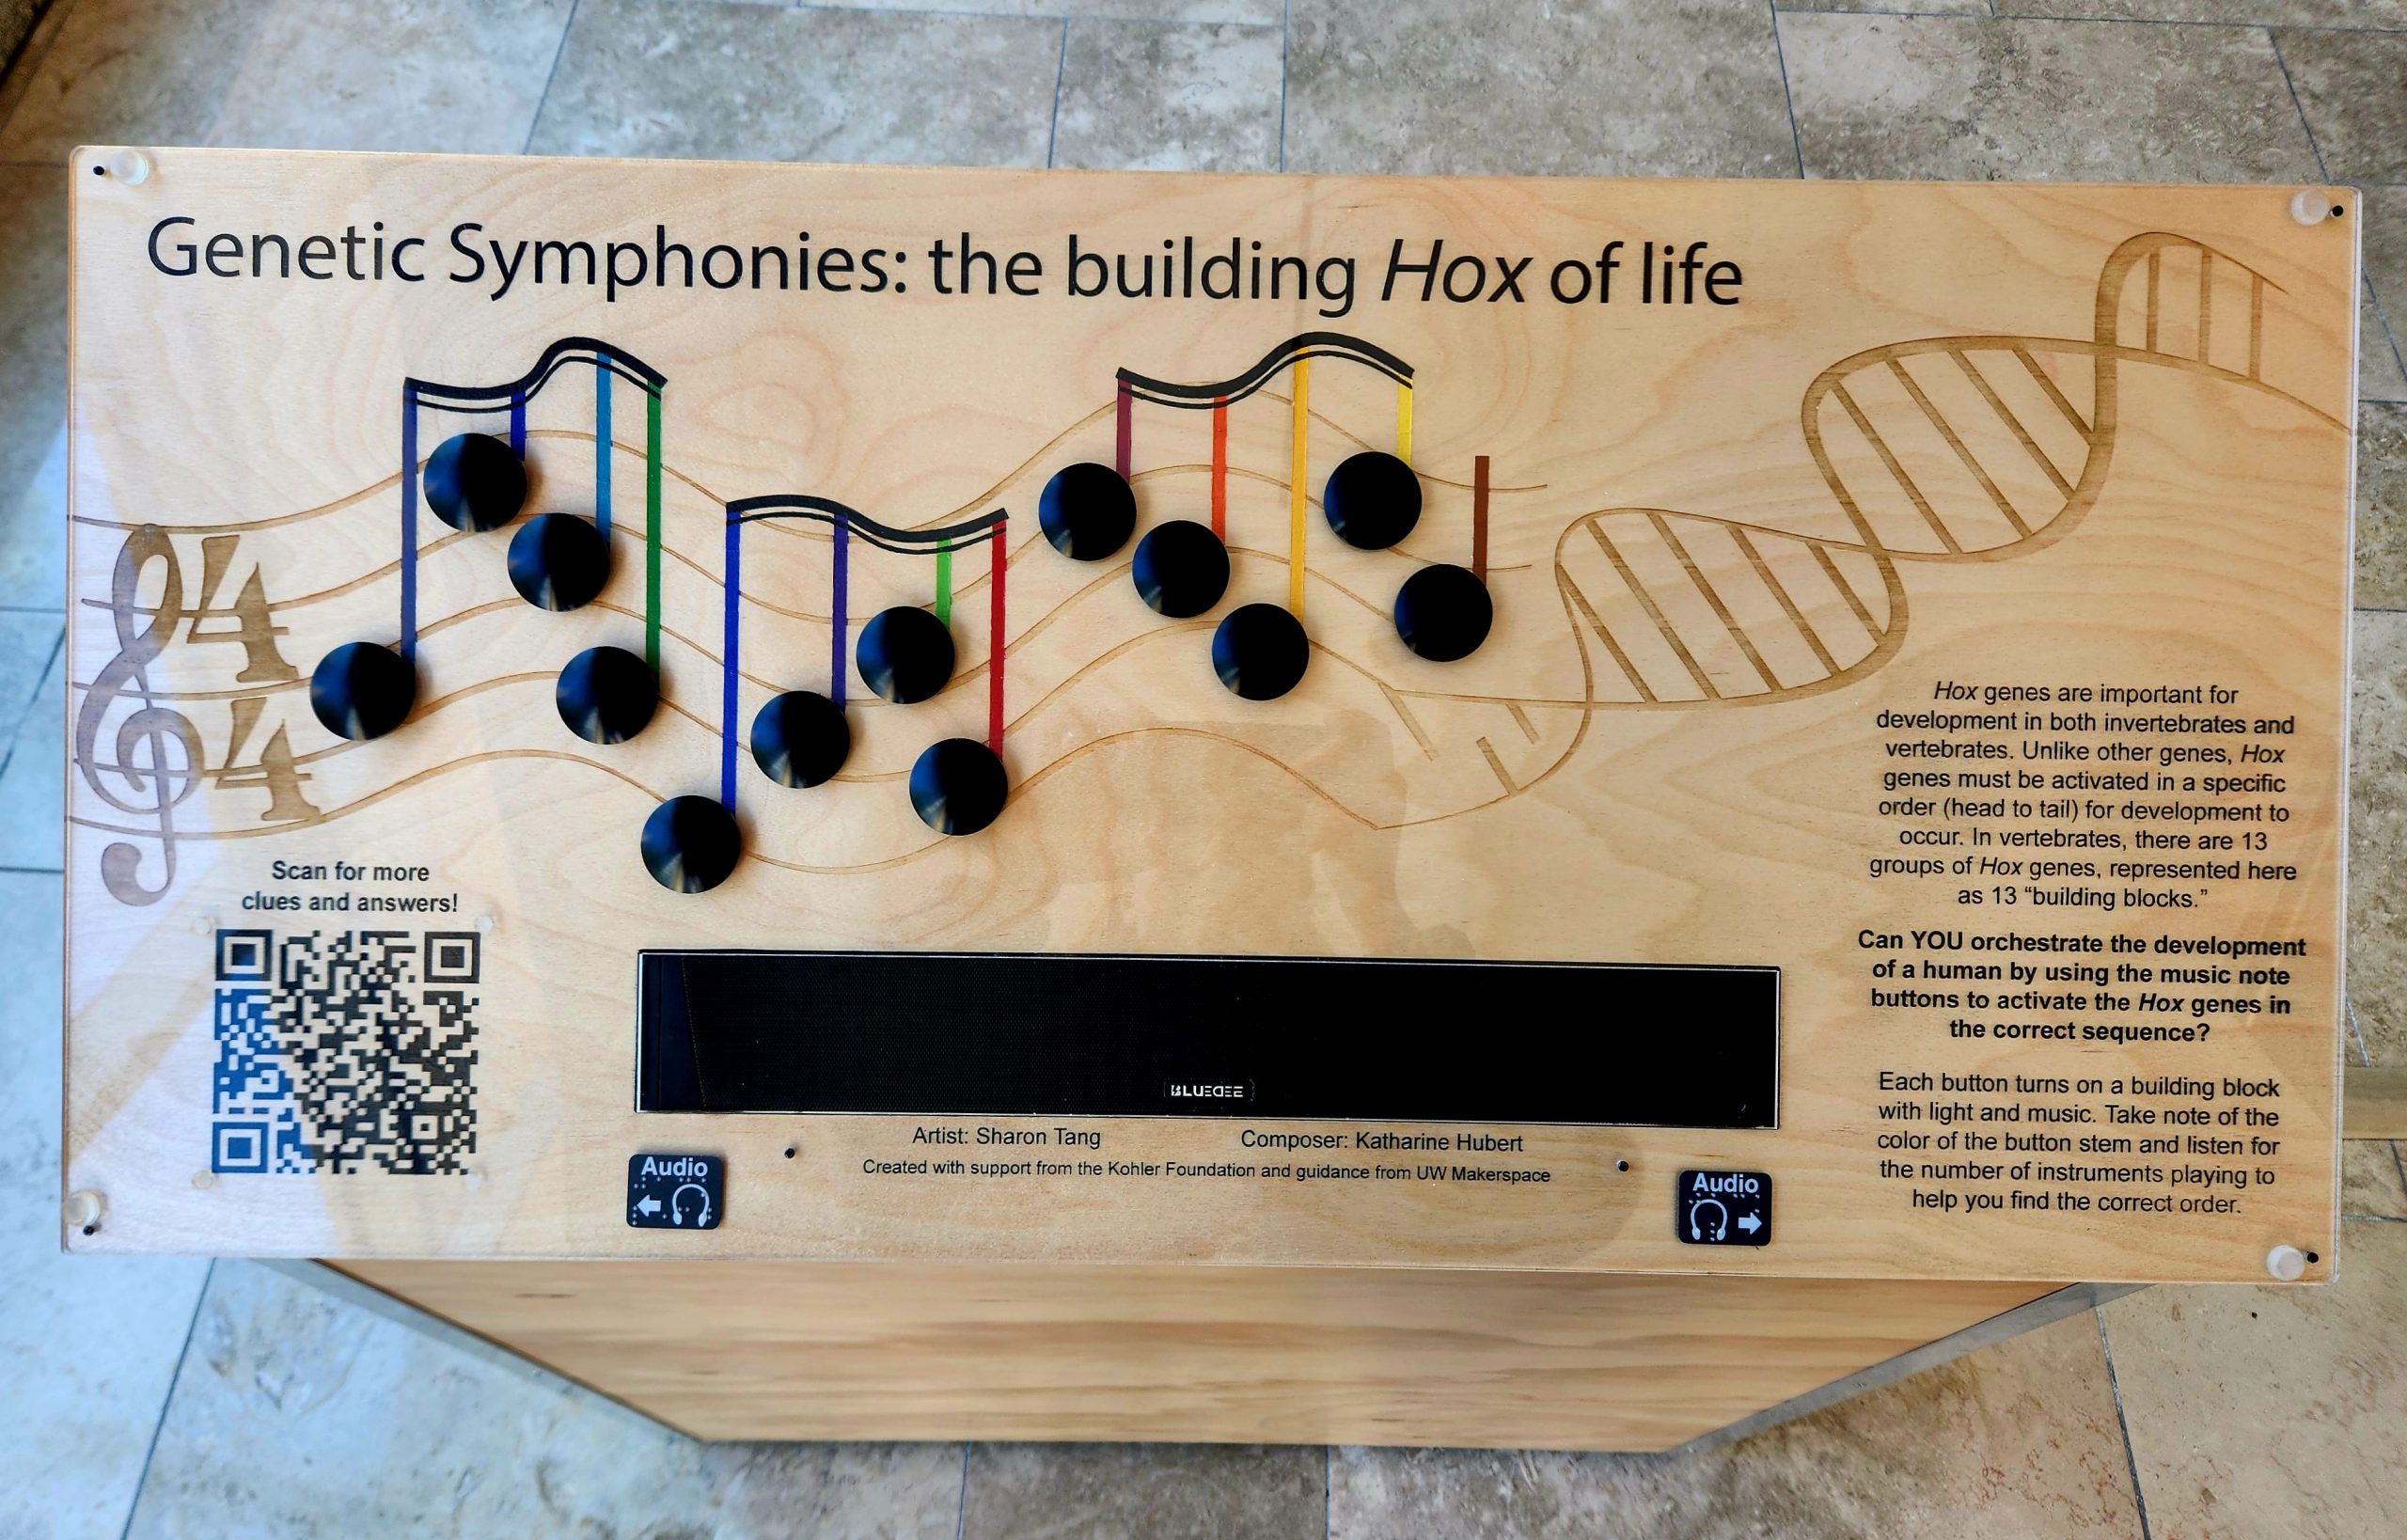 A wooden podium has a music staff laser cut on the surface. The music staff bends and gradually transitions to a DNA double helix. On the music staff are 13 black buttons, with colored note stems. The podium reads “Genetic Symphonies: Building Hox of life” at the top left and contains a scannable QR code in the bottom left for users to obtain more information. A large rectangular speaker sits in the center of the podium with text to describe the installation to the right. The descriptive text reads: “Hox genes are important for development in both vertebrates and invertebrates. Unlike other genes, Hox genes must be activated in a specific order (head to tail) for development to occur. In vertebrates, there are 13 groups of Hox genes, represented here as 13 “building blocks”. Can YOU orchestrate the development of a human by using the music note buttons to activate Hox genes in the correct sequence? Each button turns on a building block with light and music. Take note of the color of the button stem and listen for the number of instruments playing to help you find the correct order.”